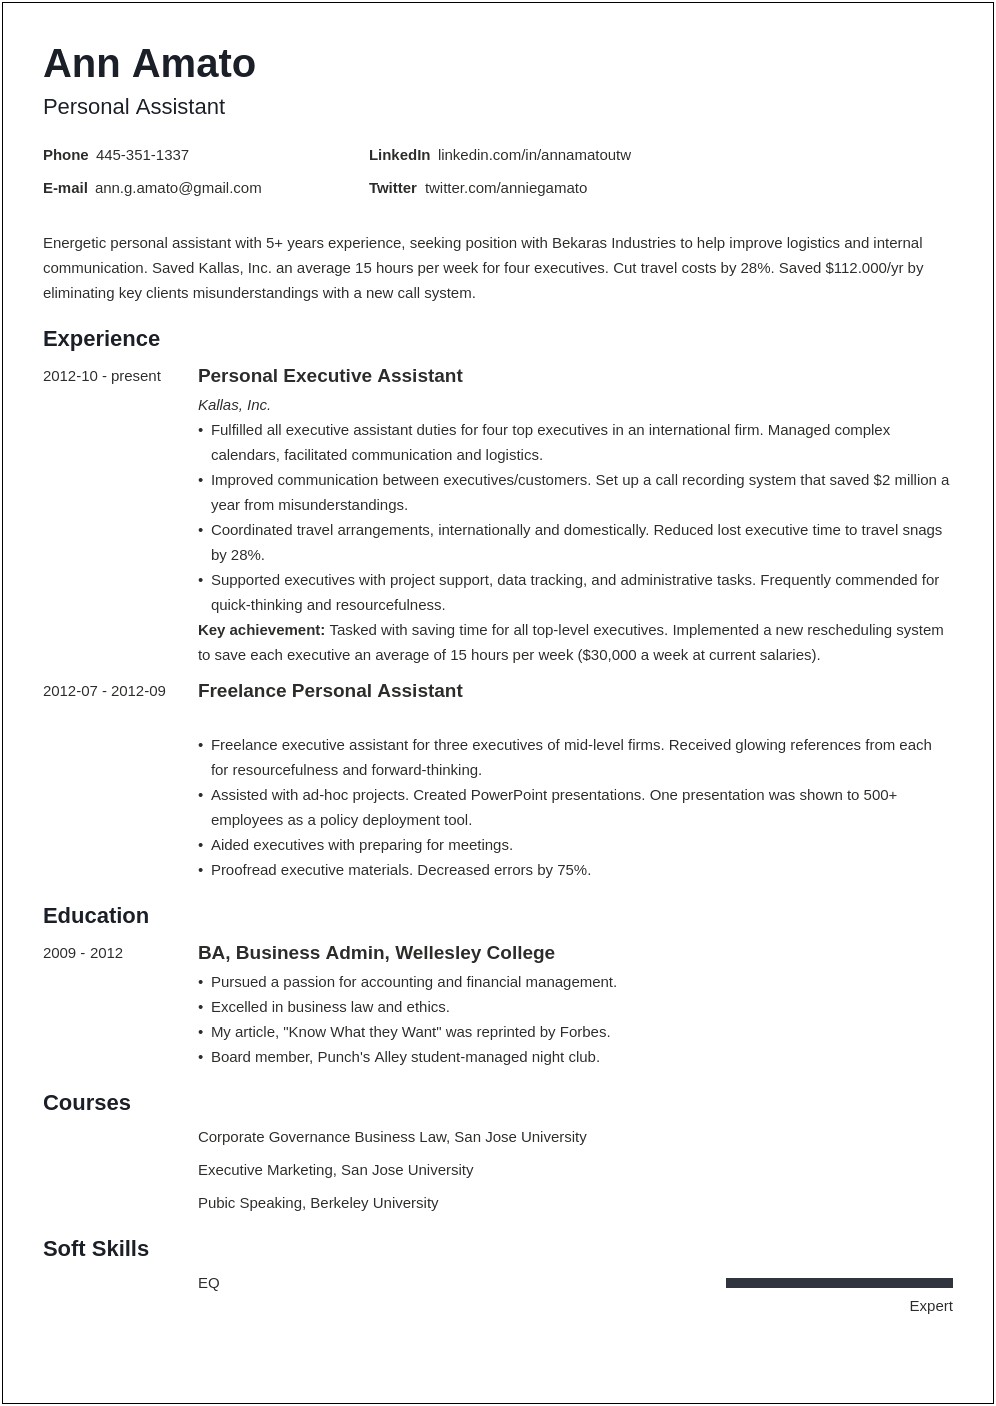 Resume Employed By Contracting Agency But Work Elsewhere